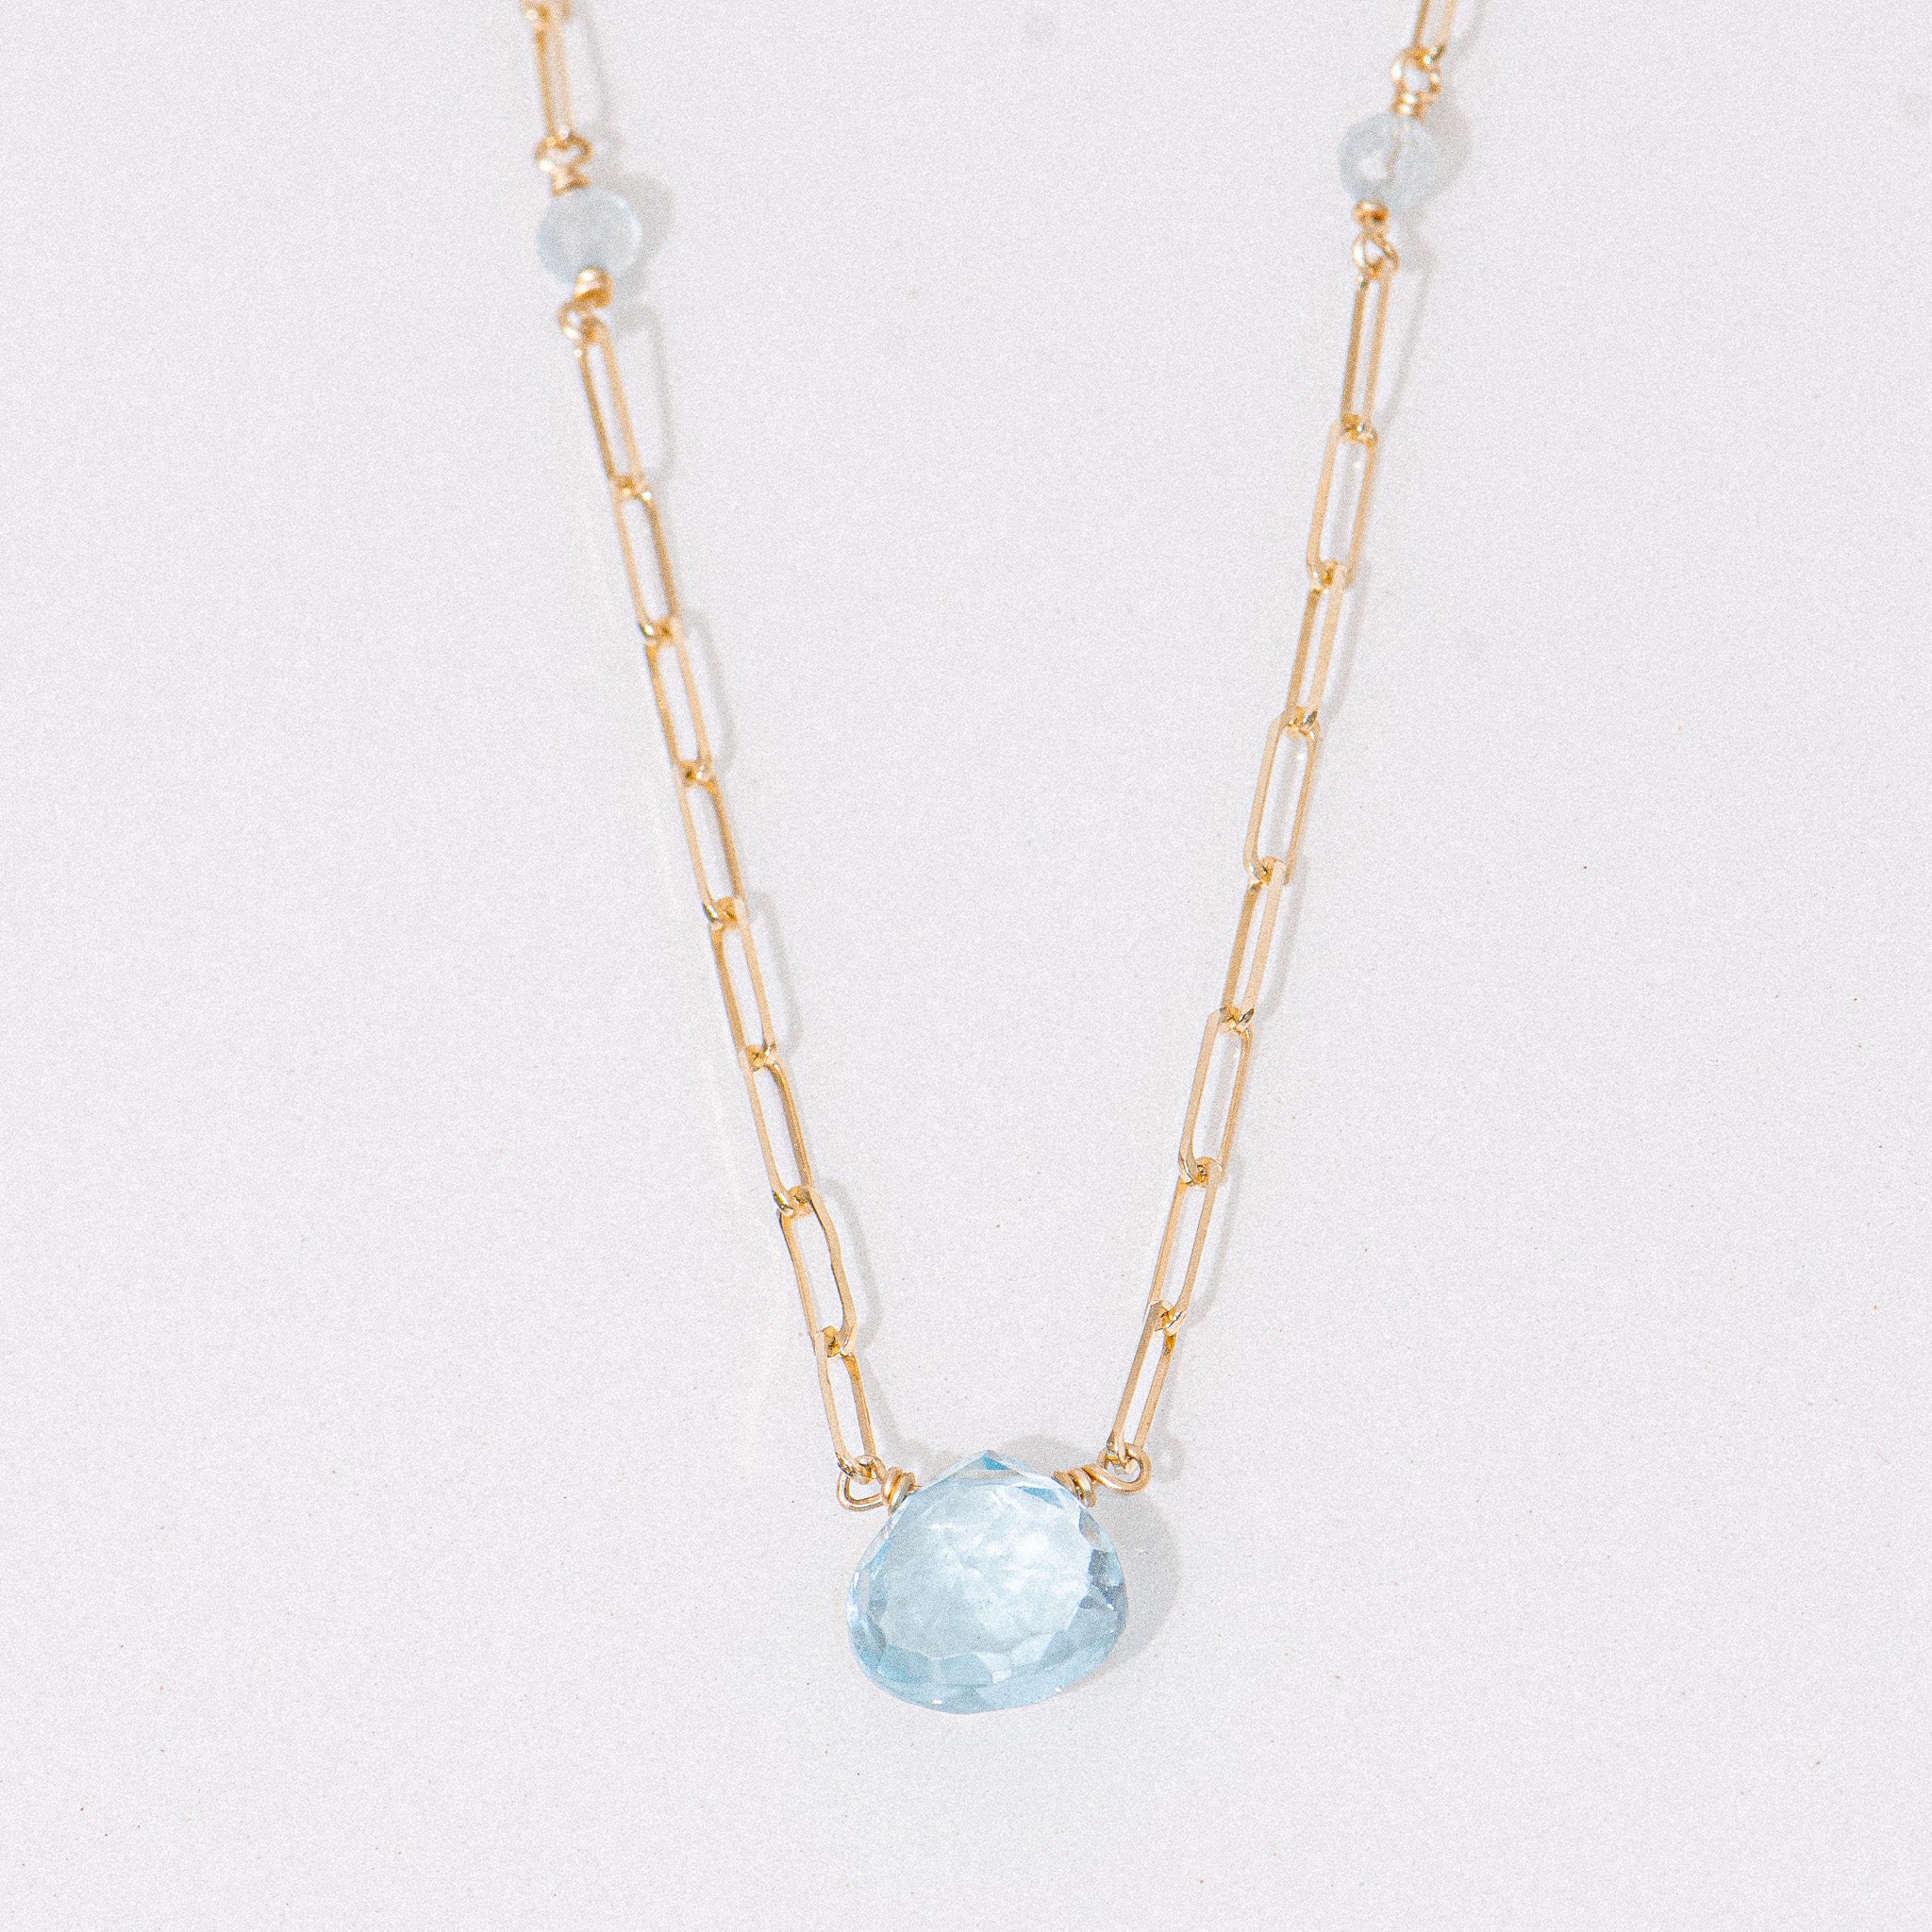 14K Yellow Gold Small Clip Chain Necklace w/ Blue Topaz and Aquamarine